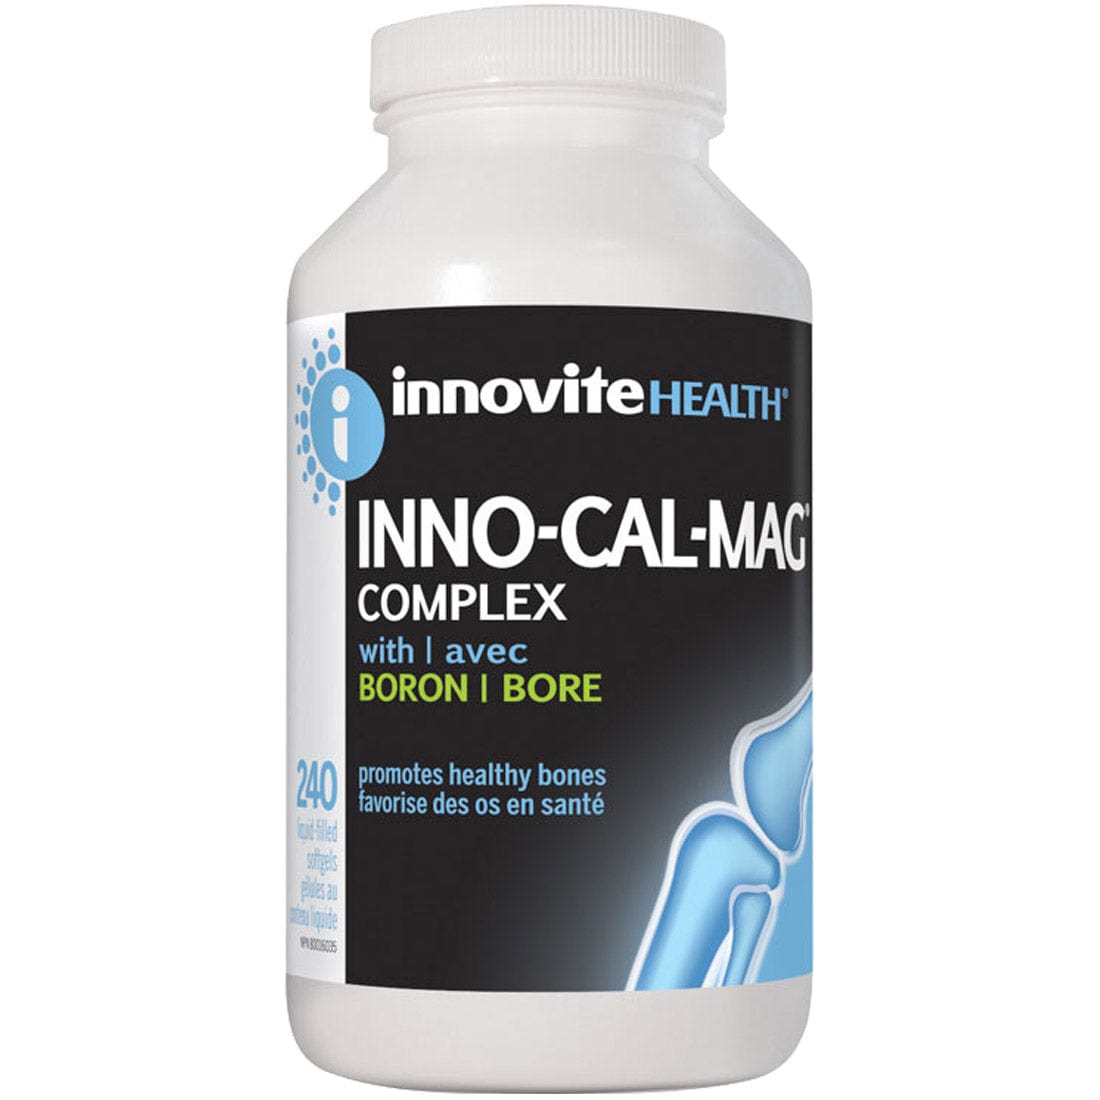 Innovite Inno-Cal-Mag Advanced (Formerly with Boron)